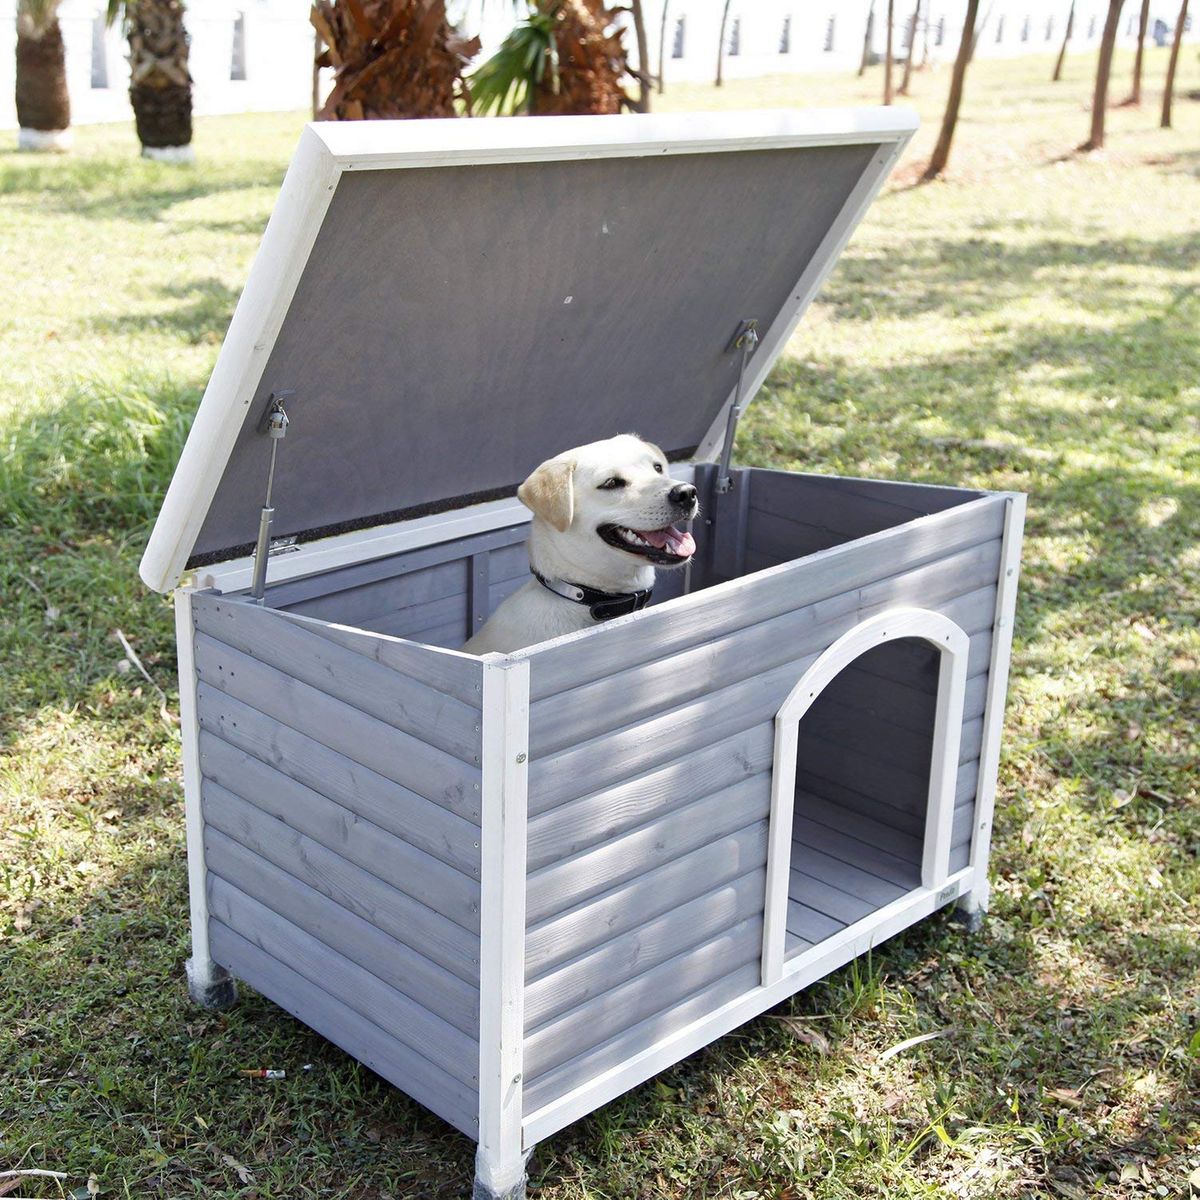 ROCKEVER Wood Dog Houses Outdoor Insulated Weatherproof Dog Houses Outside with Door Cute Wooden 